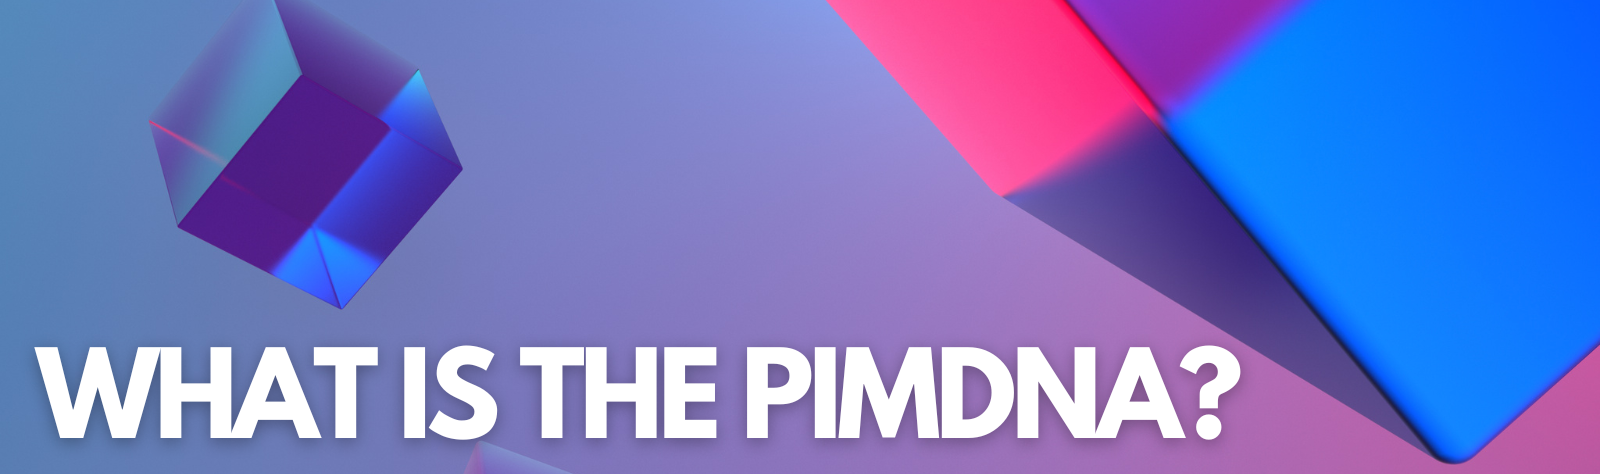 What is the PIMDNA